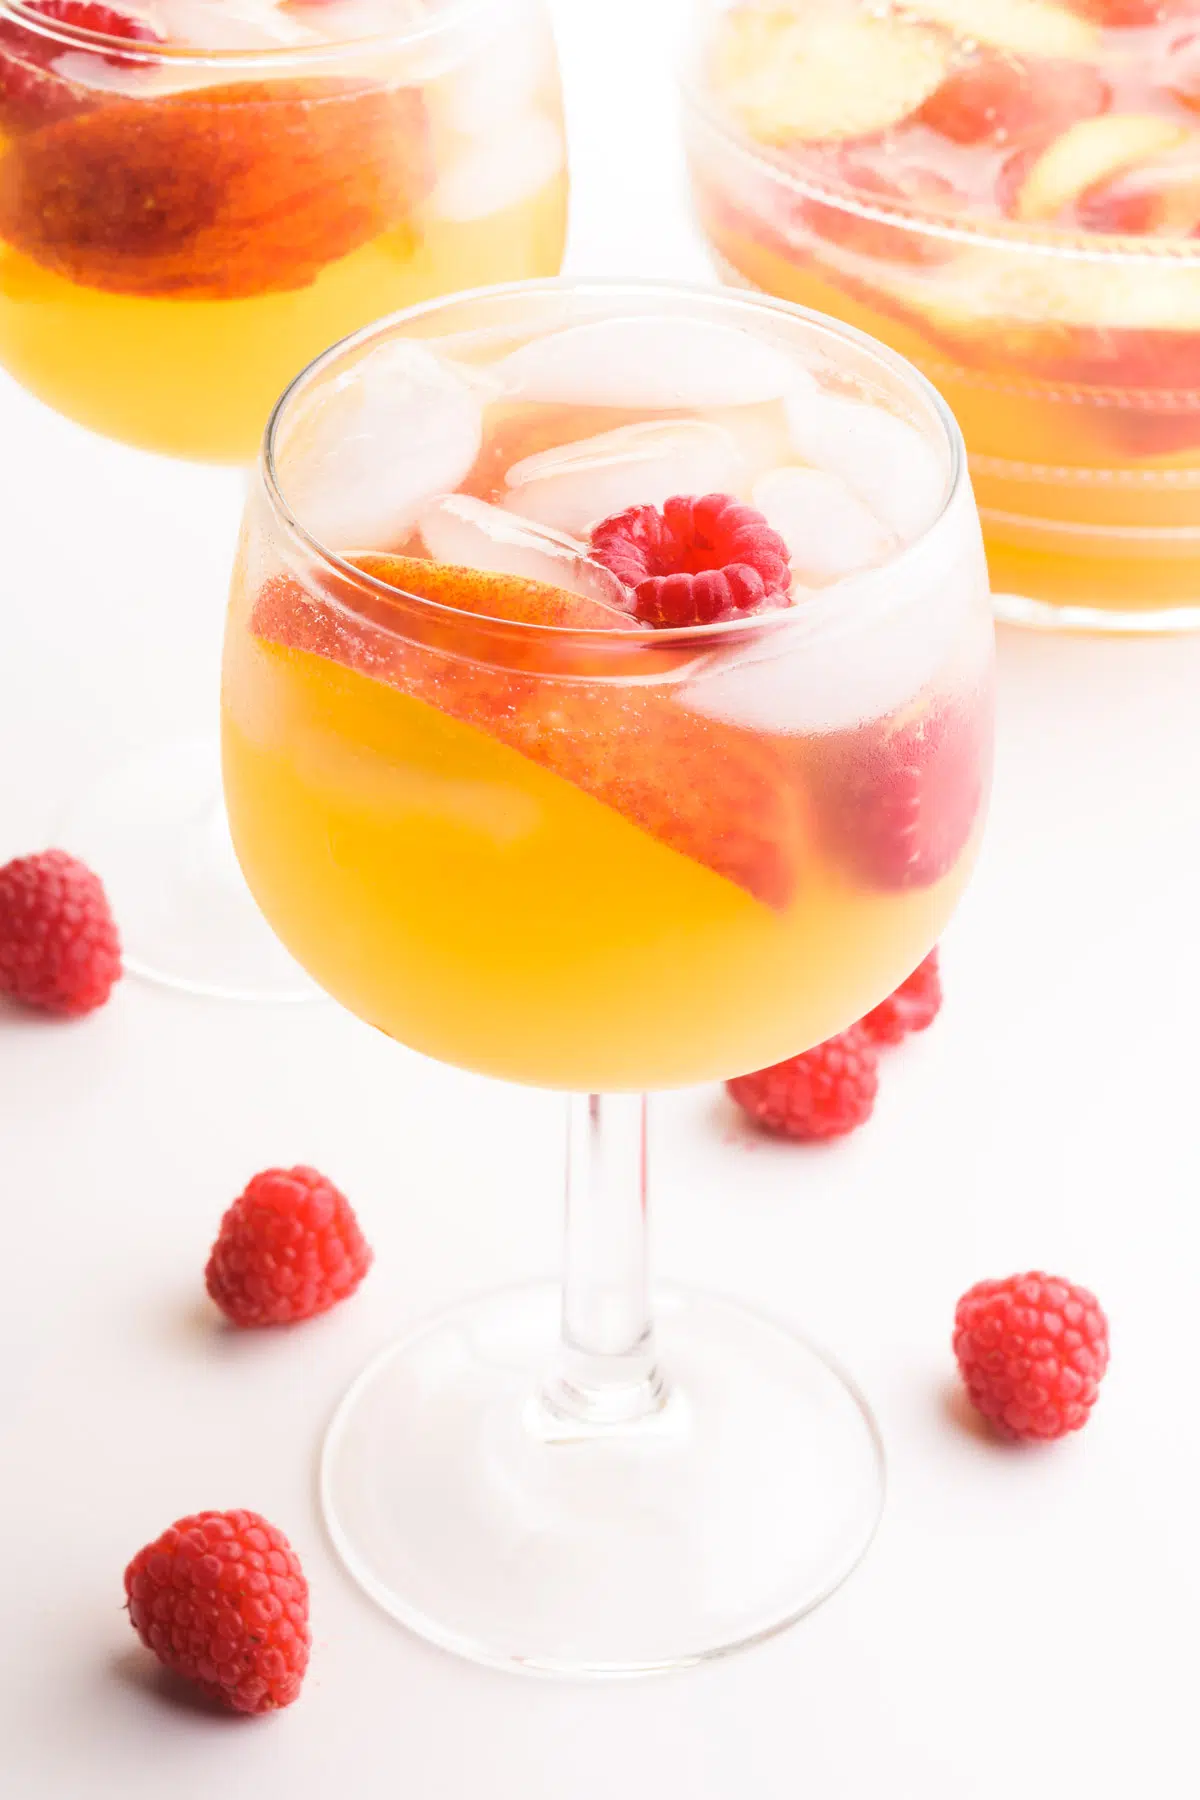 A wine glass holds peach sangria with fresh raspberries and peach slices. There's fresh raspberries, a pitcher of sangria, and another wine glass full of sangria around it.